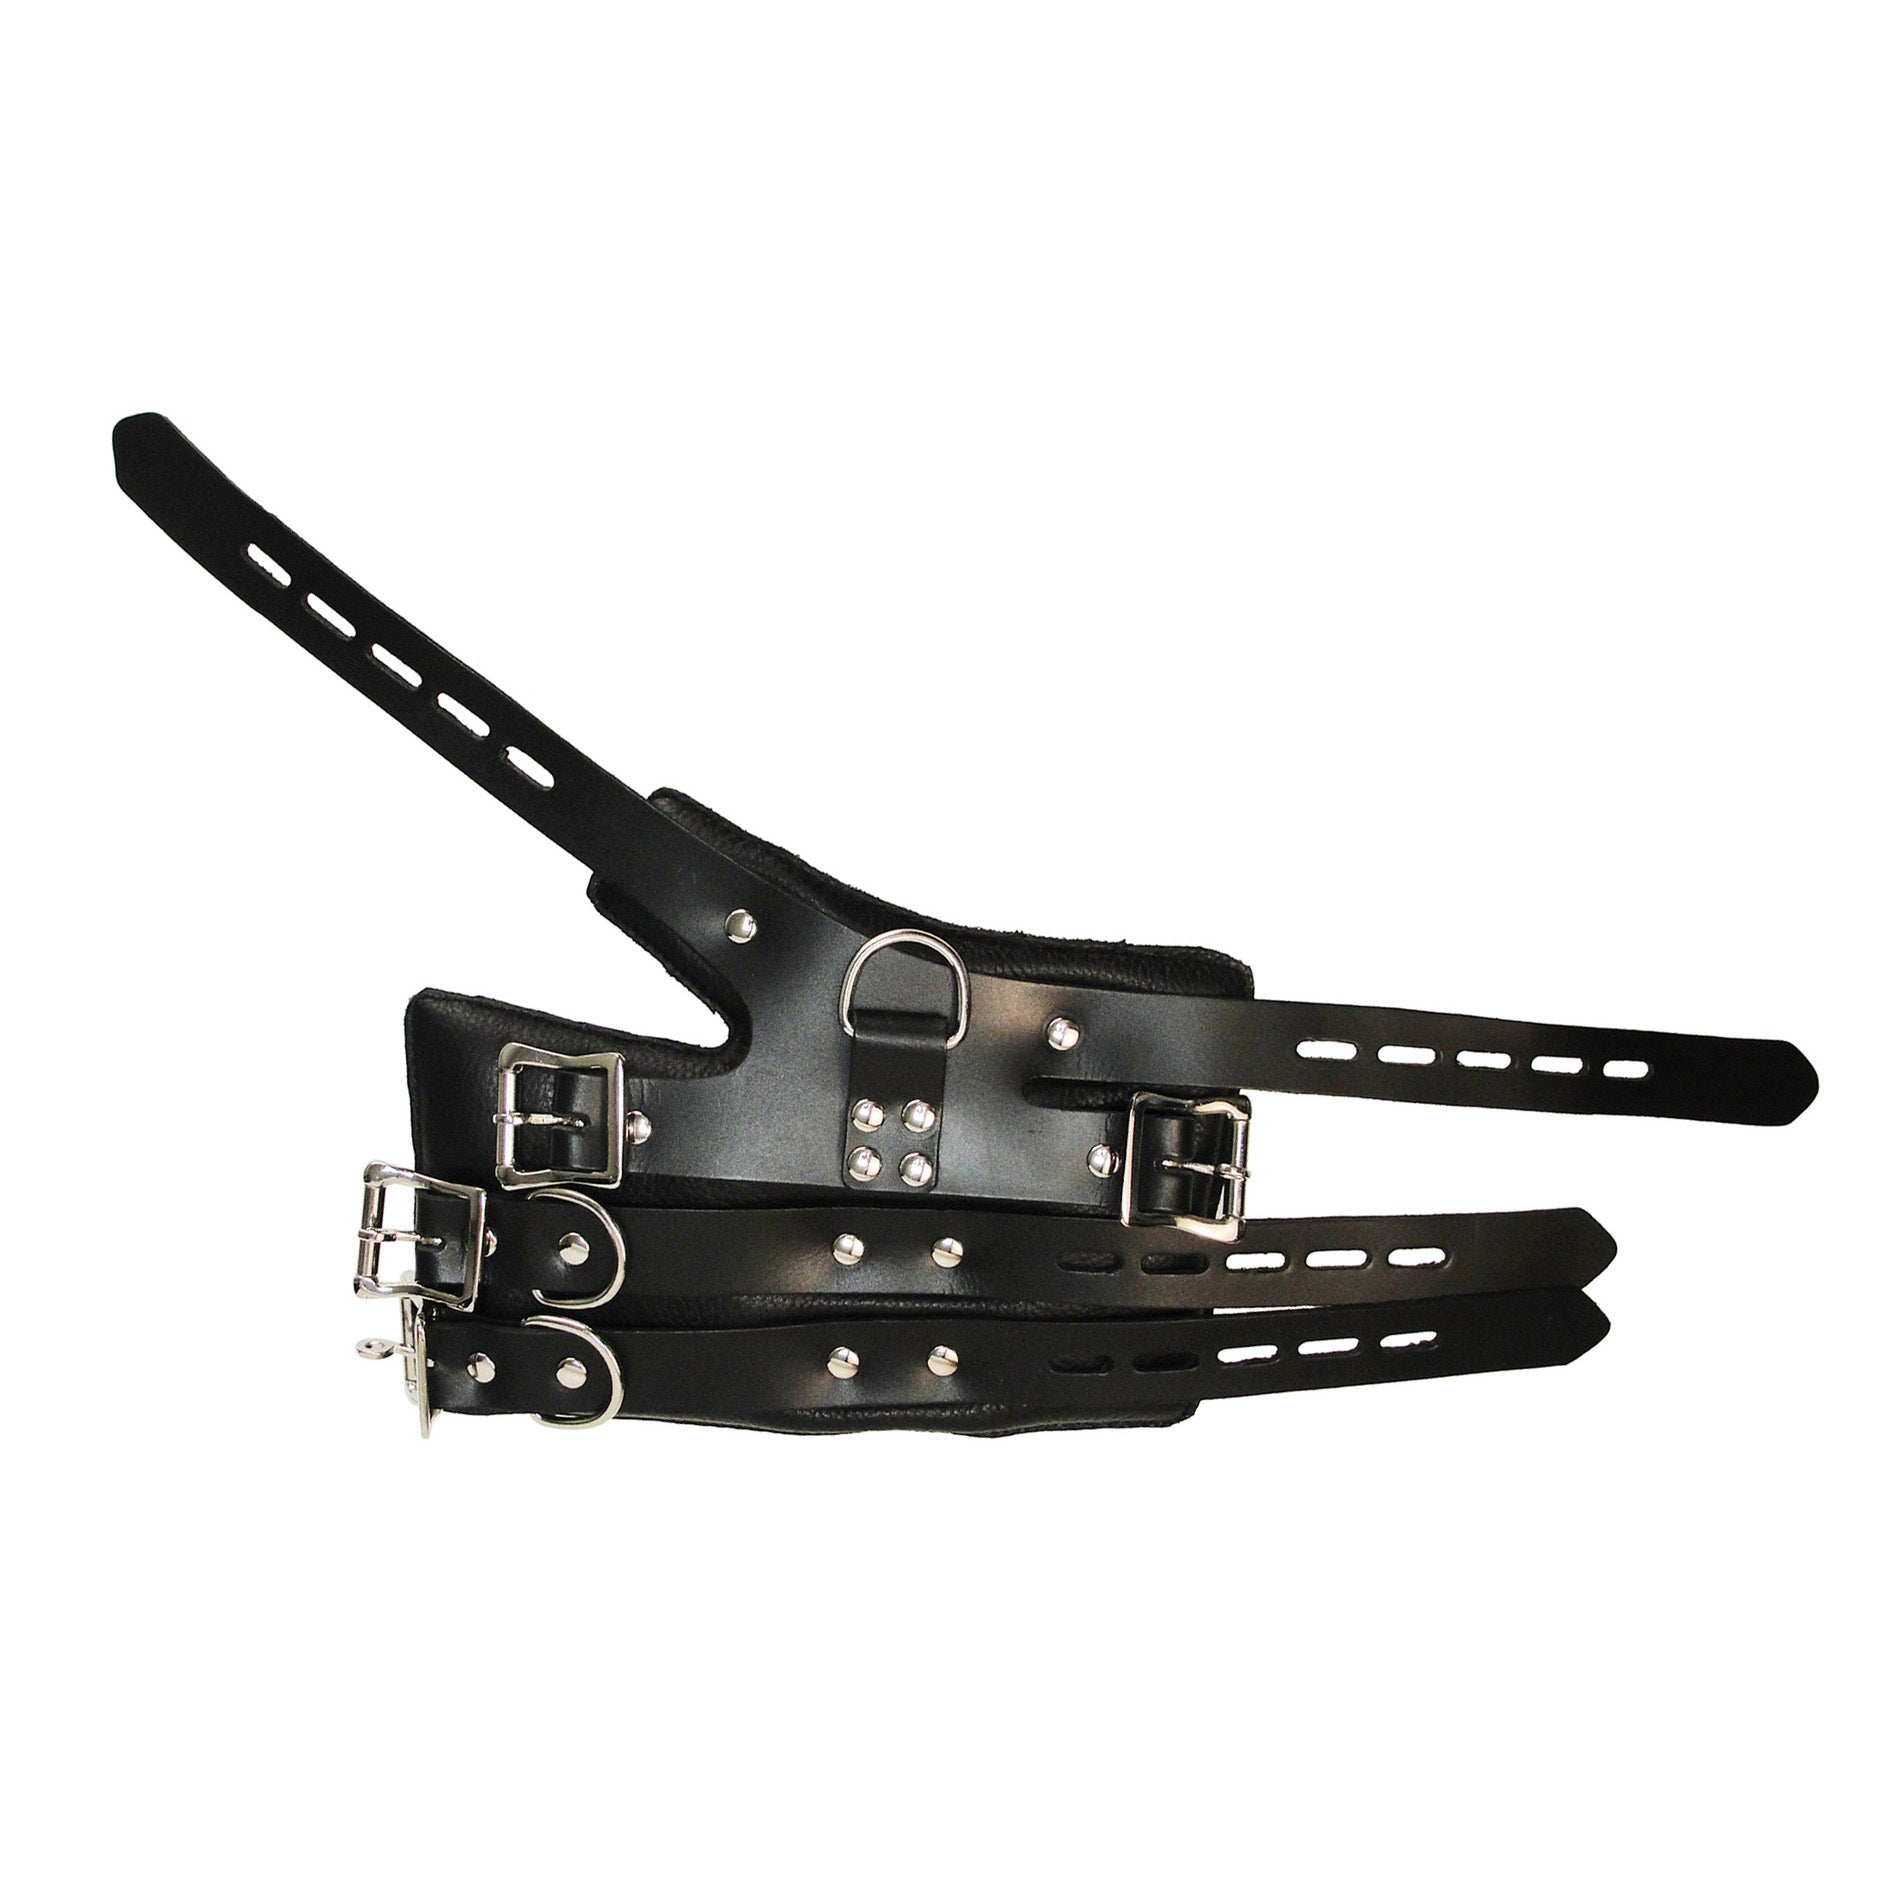 Strict Leather Four Buckle Suspension Cuffs